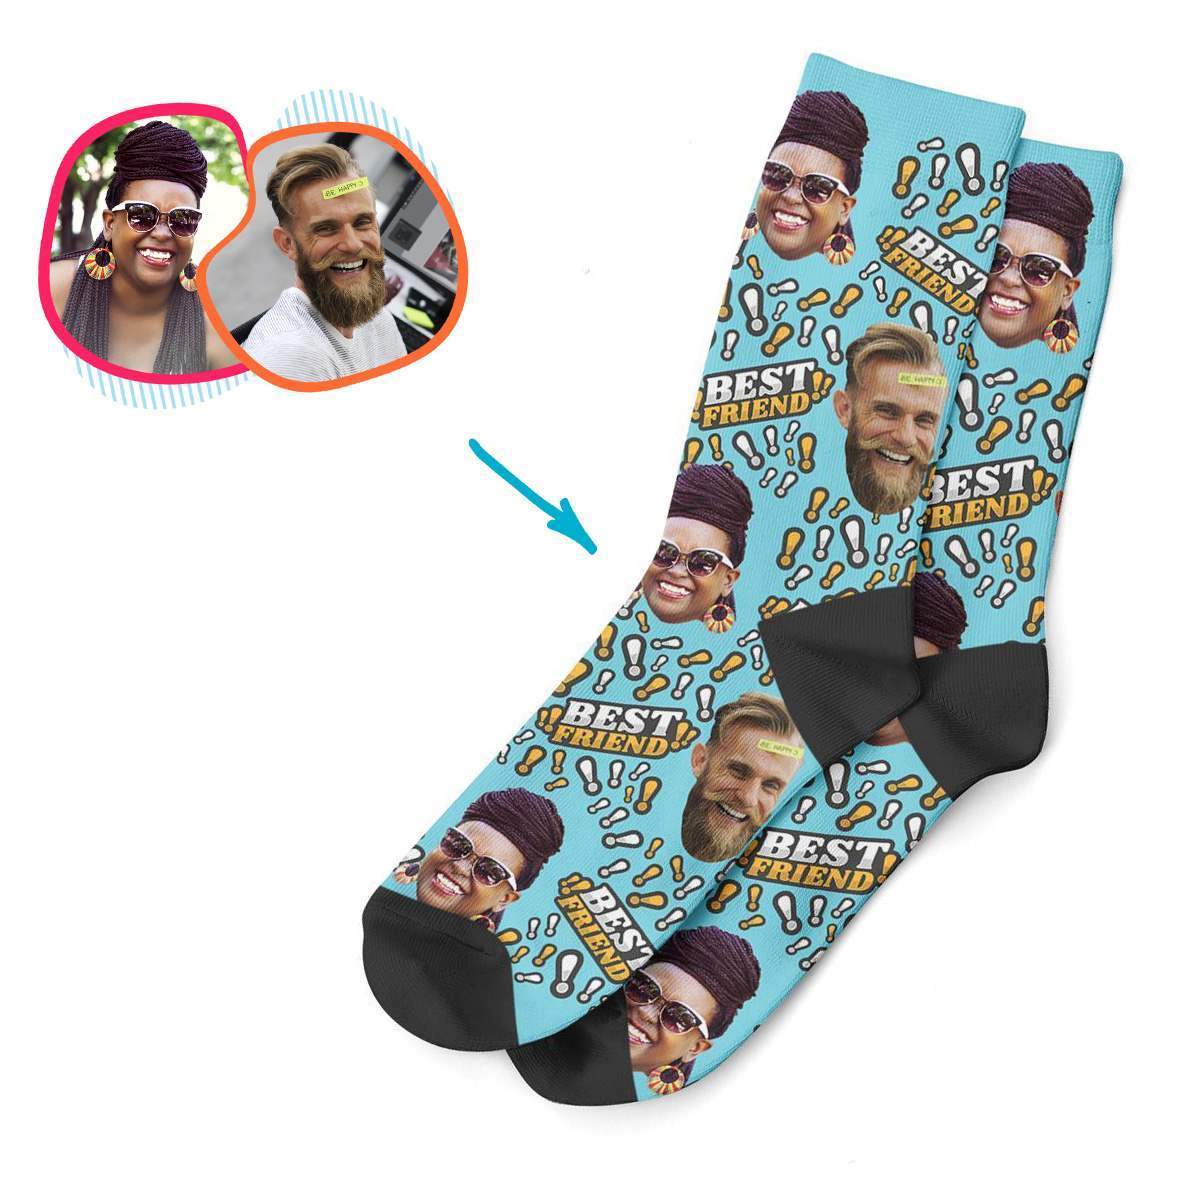 blue Best Friend socks personalized with photo of face printed on them